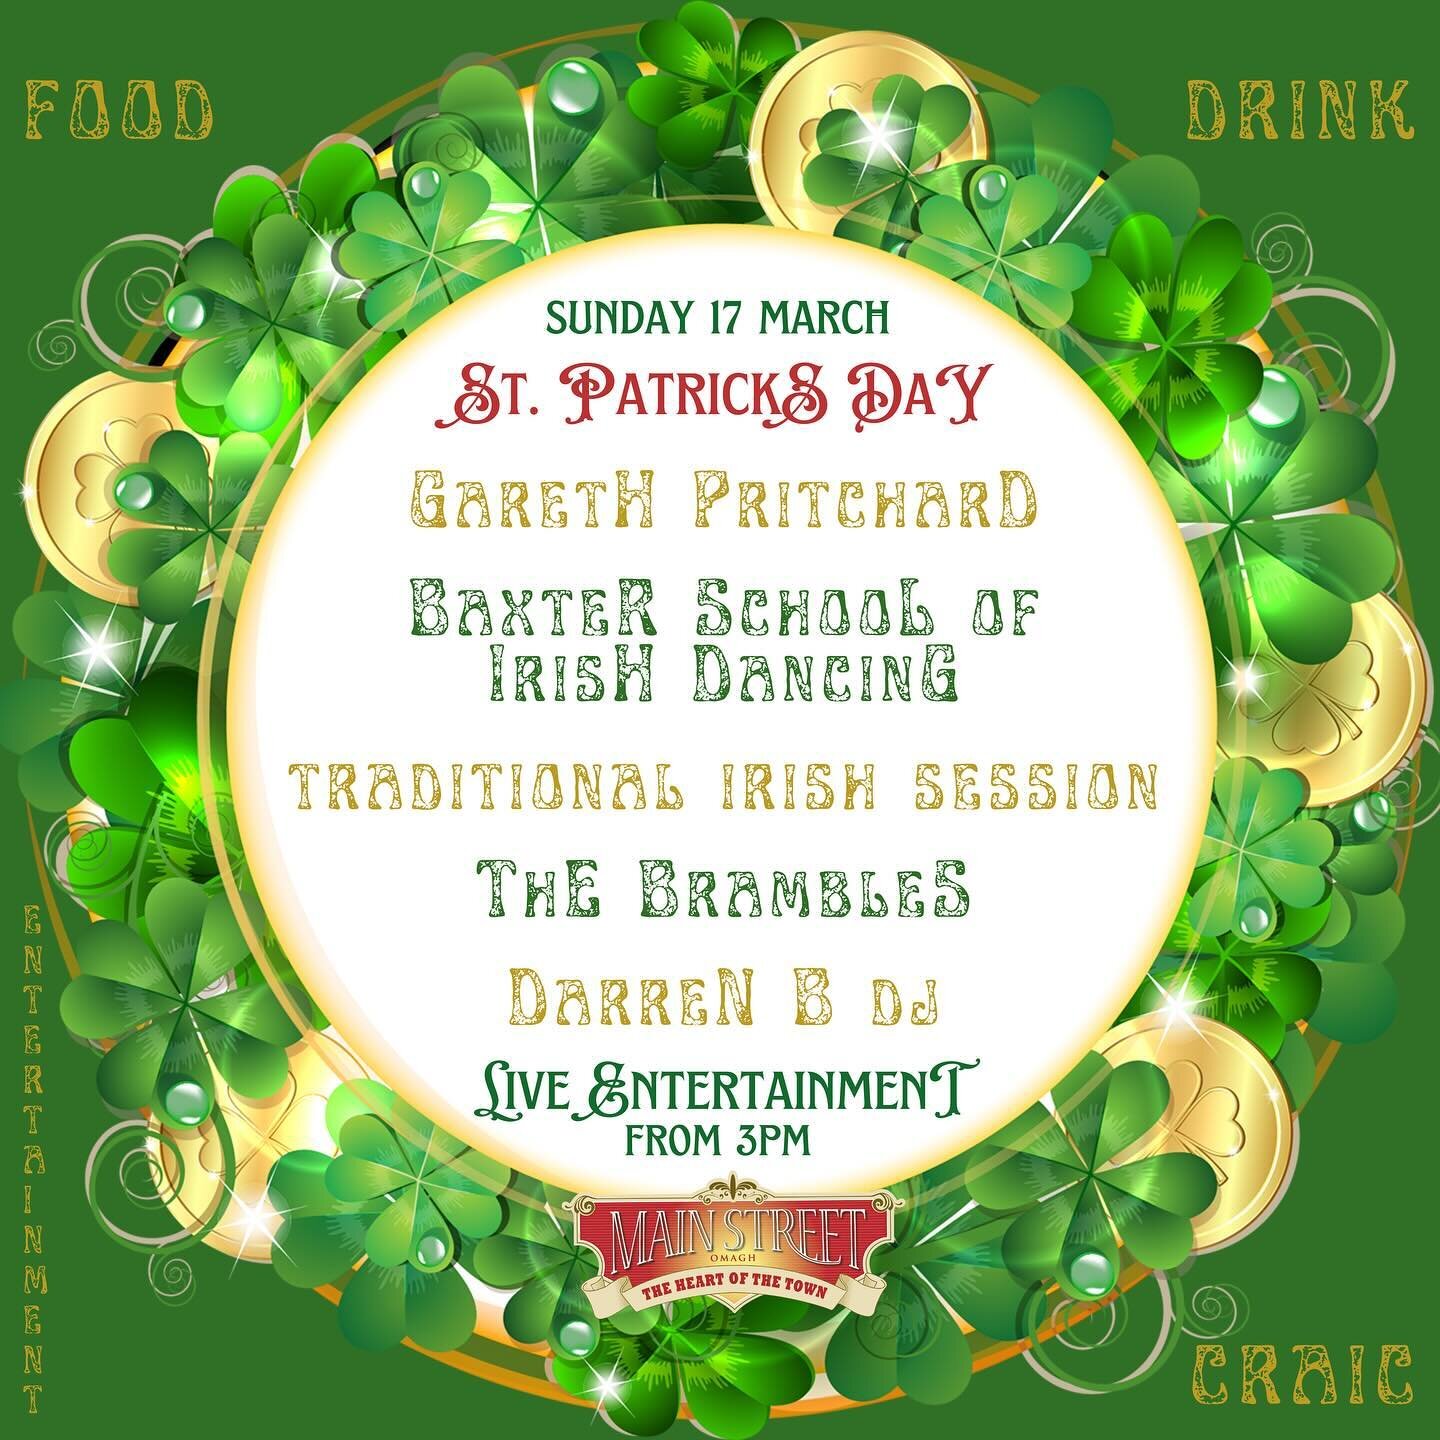 ☘️ 𝙎𝙩 𝙋𝙖𝙩𝙧𝙞𝙘𝙠𝙨 𝘿𝙖𝙮 on MainStreet . . 

Let&rsquo;s get the place #shamrockin

Main Street Complex Stage 
🎶 @gareth_pritchard_music 
🪩 @baxterschool 

Se&aacute;n &Oacute;g&rsquo;s
🪕 Sunday Session 

Hennessys
🎙️ @thebramblesband 

Ti